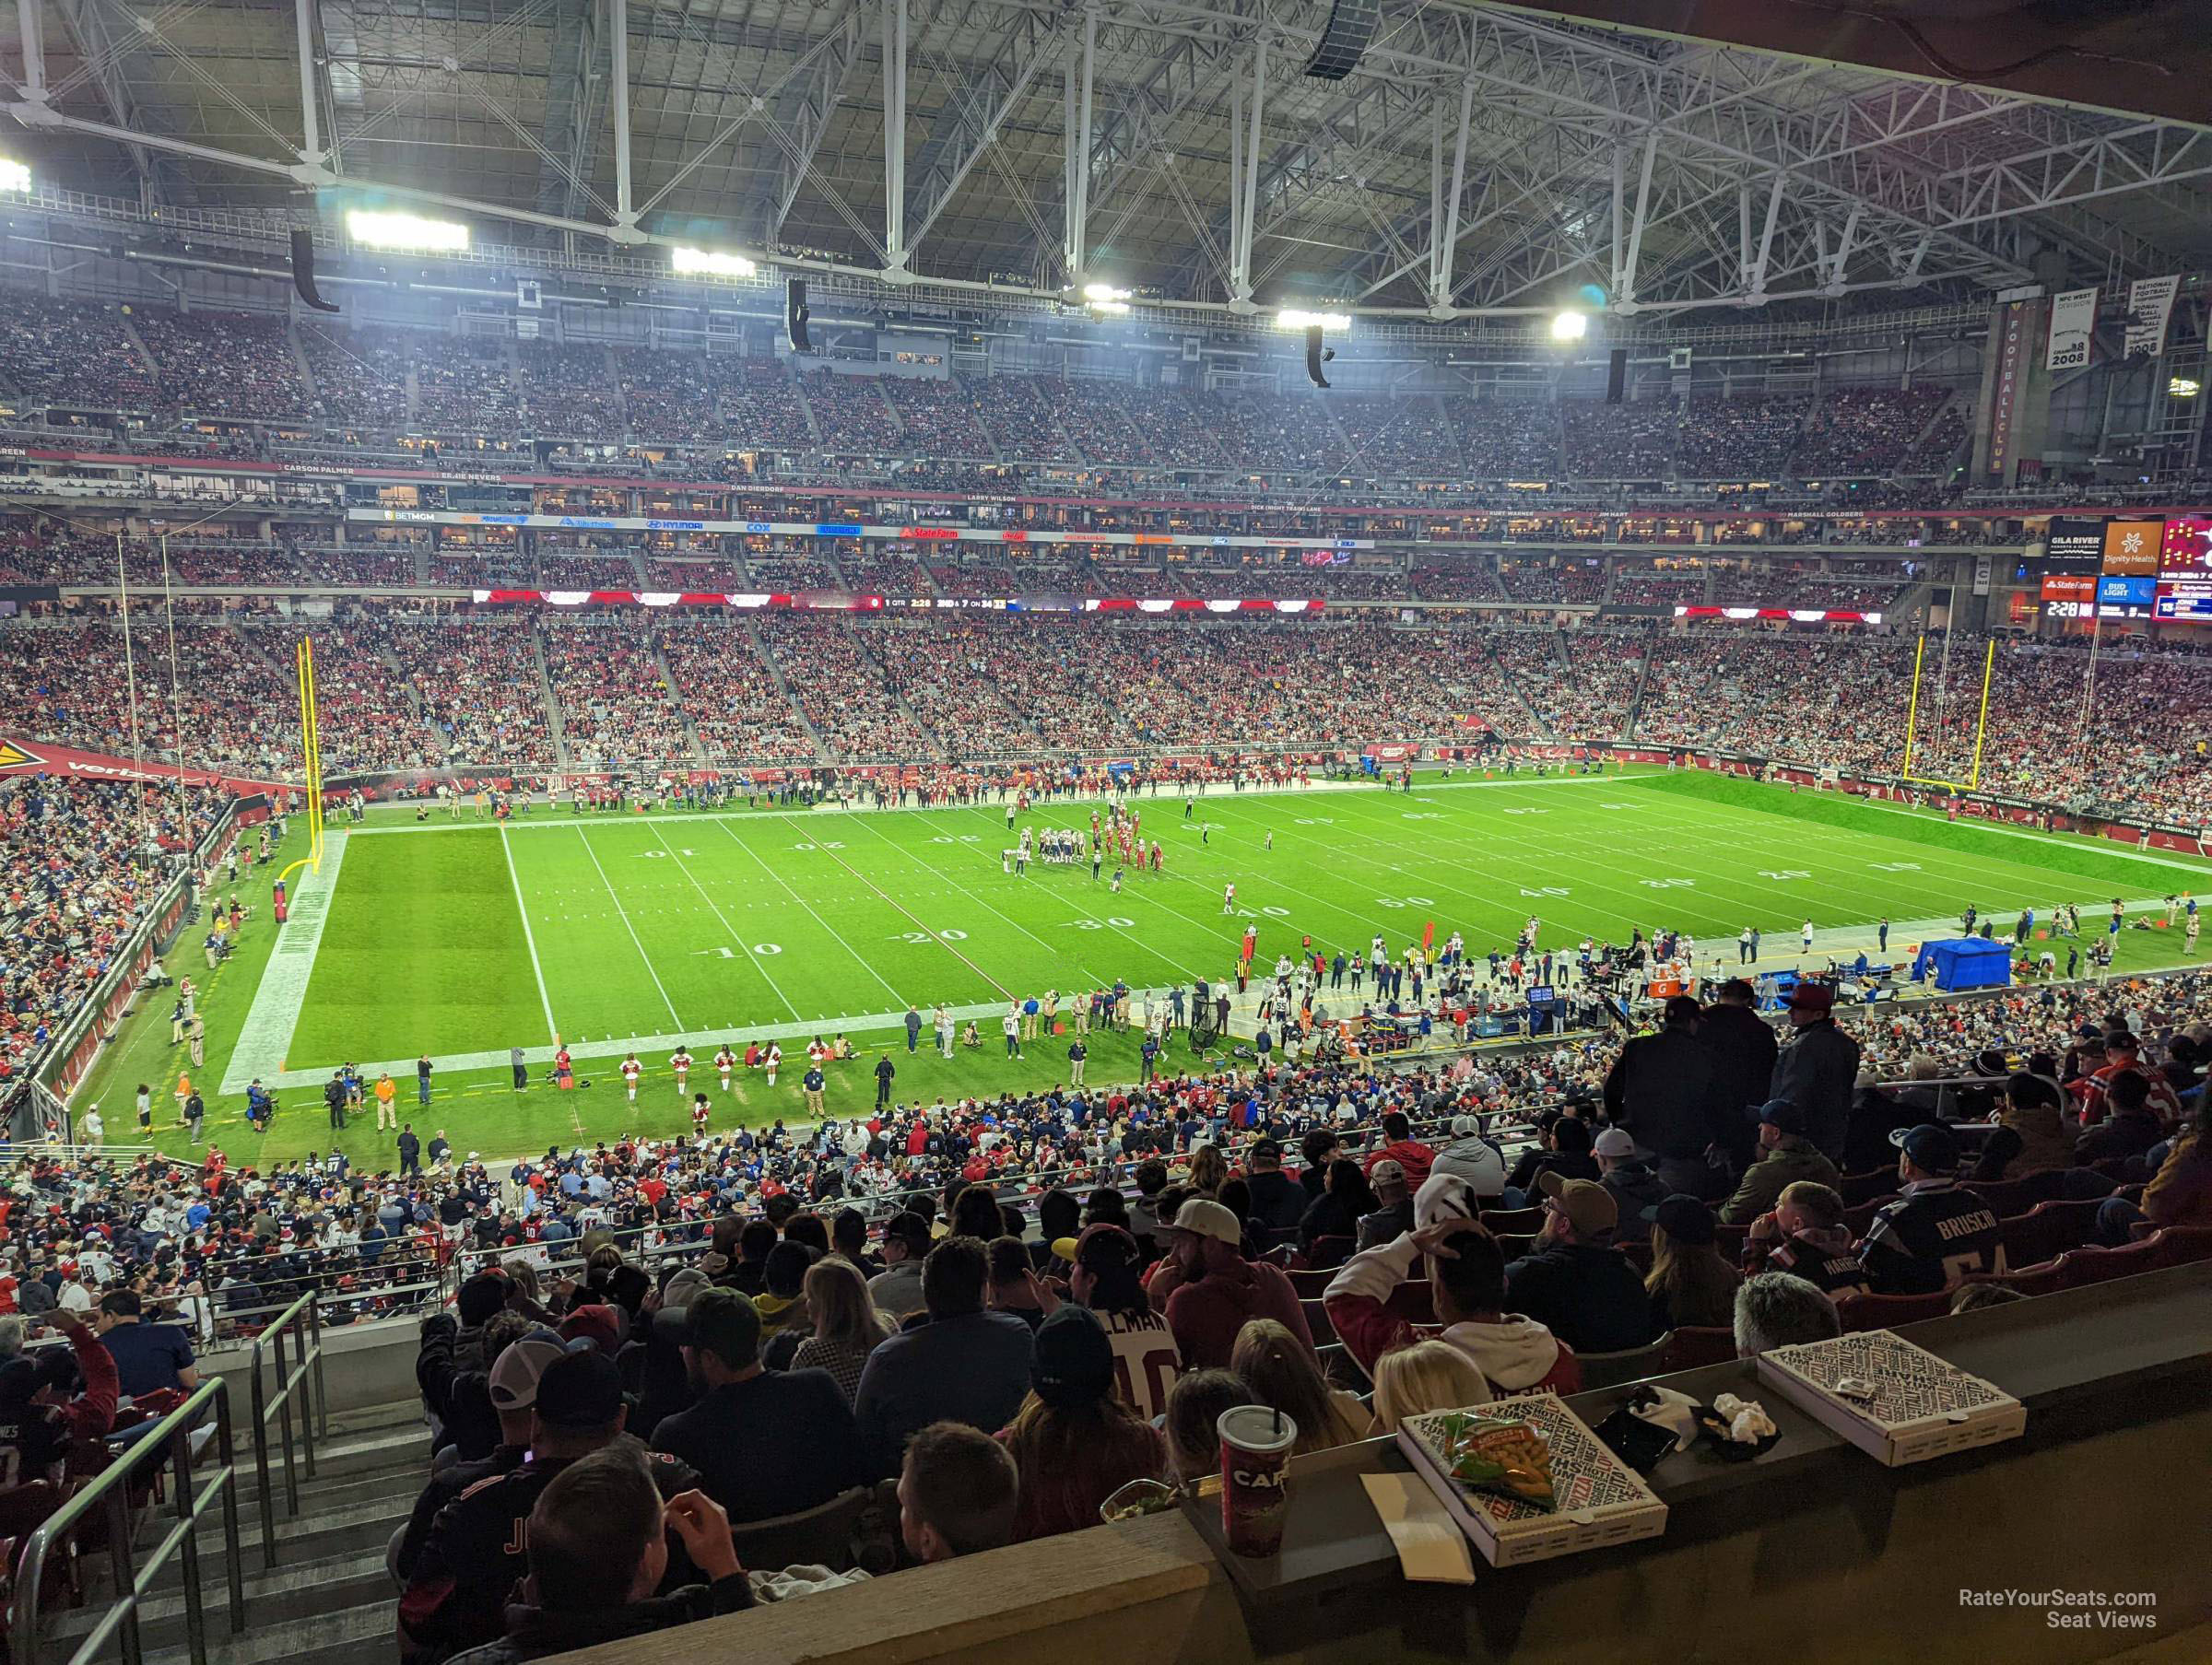 section 242, row 12 seat view  for football - state farm stadium